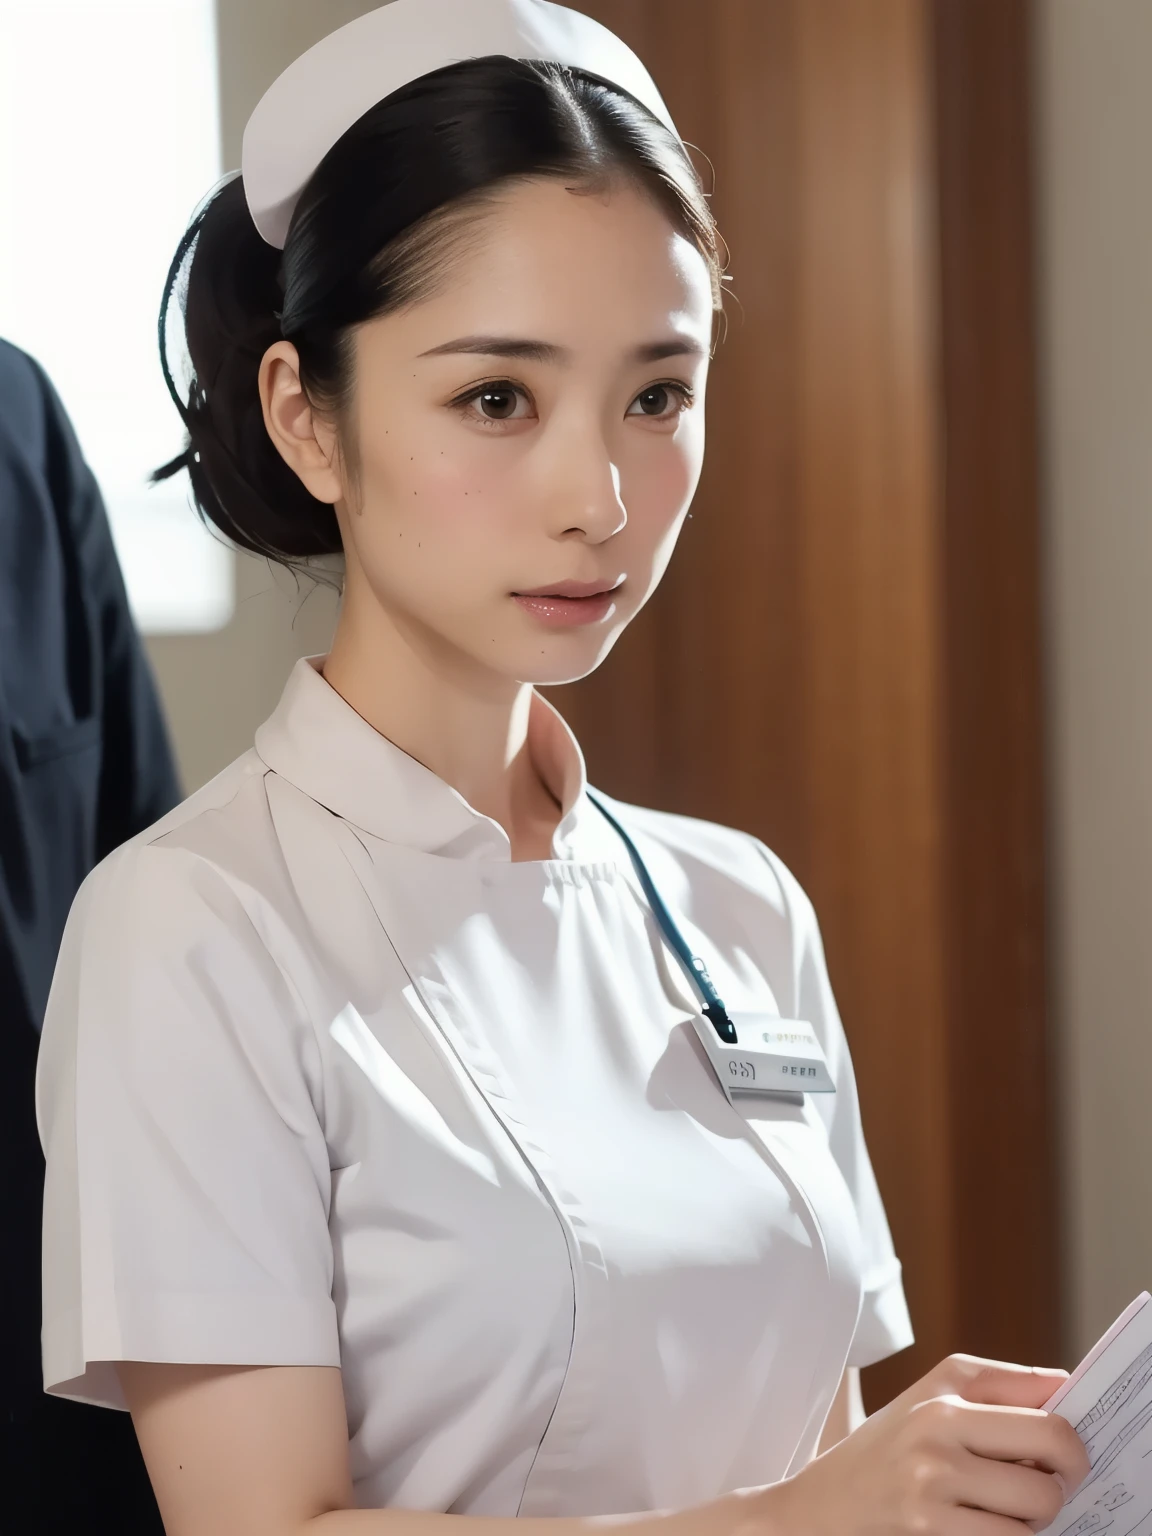 1 girl,(Wearing white nurse clothes:1.2),(RAW photo, highest quality), (realistic, photo-realistic:1.4), masterpiece, very delicate and beautiful, very detailed, 2k wallpaper, wonderful, finely, very detailed CG unity 8k wallpaper, Super detailed, High resolution, soft light, beautiful detailed girl, very detailed eyes and face, beautifully detailed nose, finely beautiful eyes, nurse, perfect anatomy, black hair, up style, nurse uniform, ((nurse cap)), long skirt, nurse, white costume, thin, hospital, clear, white uniform, hospital room, auscultation on the neck,face close up